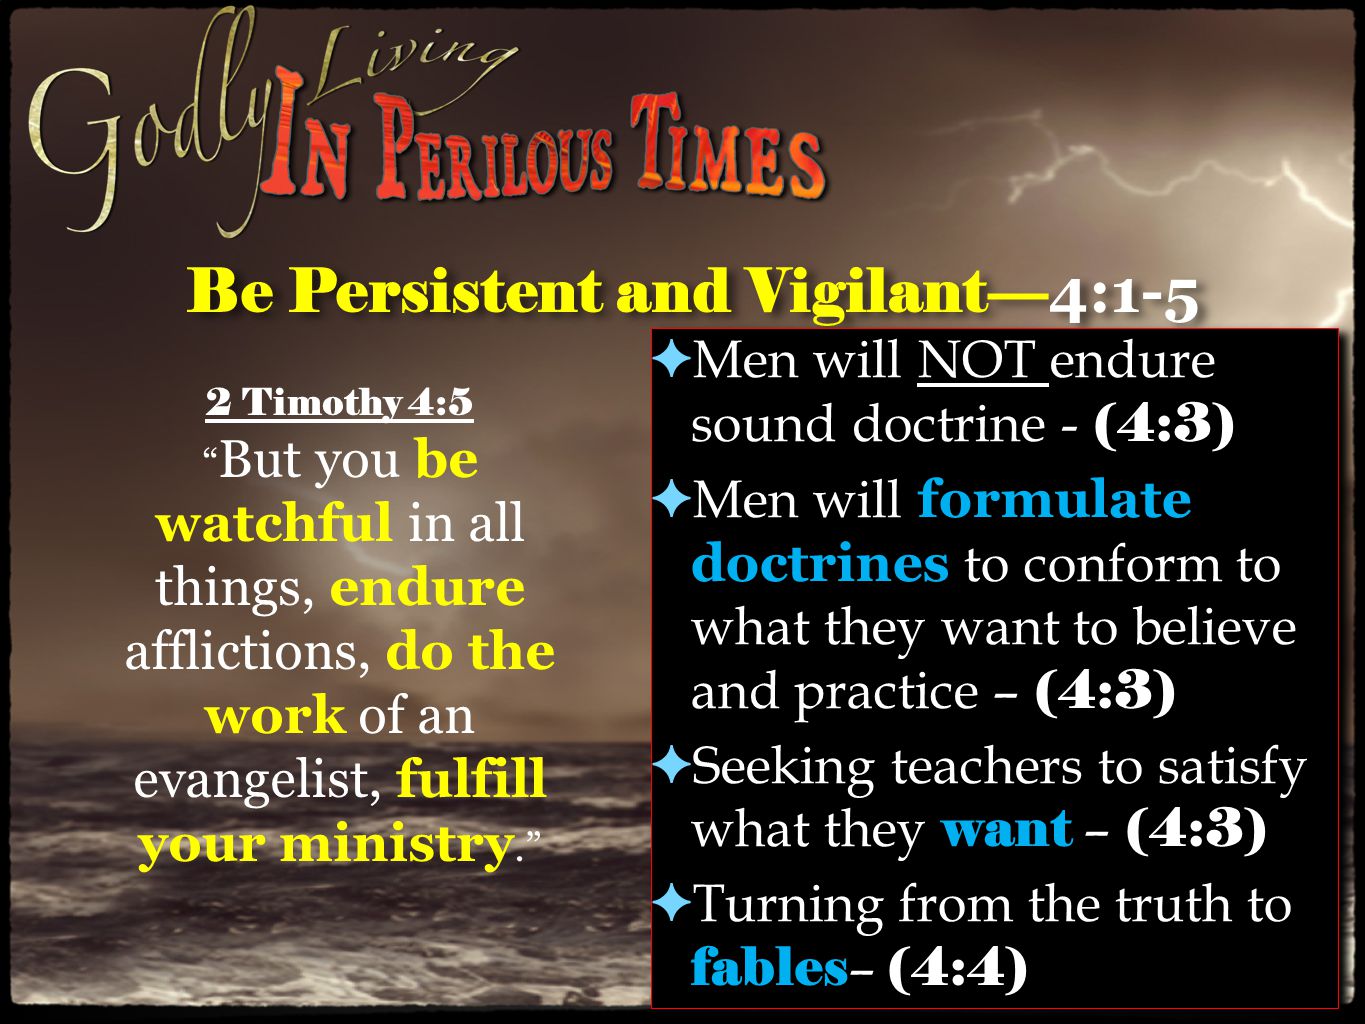 Be Persistent and Vigilant— 4:1-5 ✦ Men will NOT endure sound doctrine - (4:3) ✦ Men will formulate doctrines to conform to what they want to believe and practice – (4:3) ✦ Seeking teachers to satisfy what they want – (4:3) ✦ Turning from the truth to fables – (4:4) ✦ Men will NOT endure sound doctrine - (4:3) ✦ Men will formulate doctrines to conform to what they want to believe and practice – (4:3) ✦ Seeking teachers to satisfy what they want – (4:3) ✦ Turning from the truth to fables – (4:4) 2 Timothy 4:5 But you be watchful in all things, endure afflictions, do the work of an evangelist, fulfill your ministry.